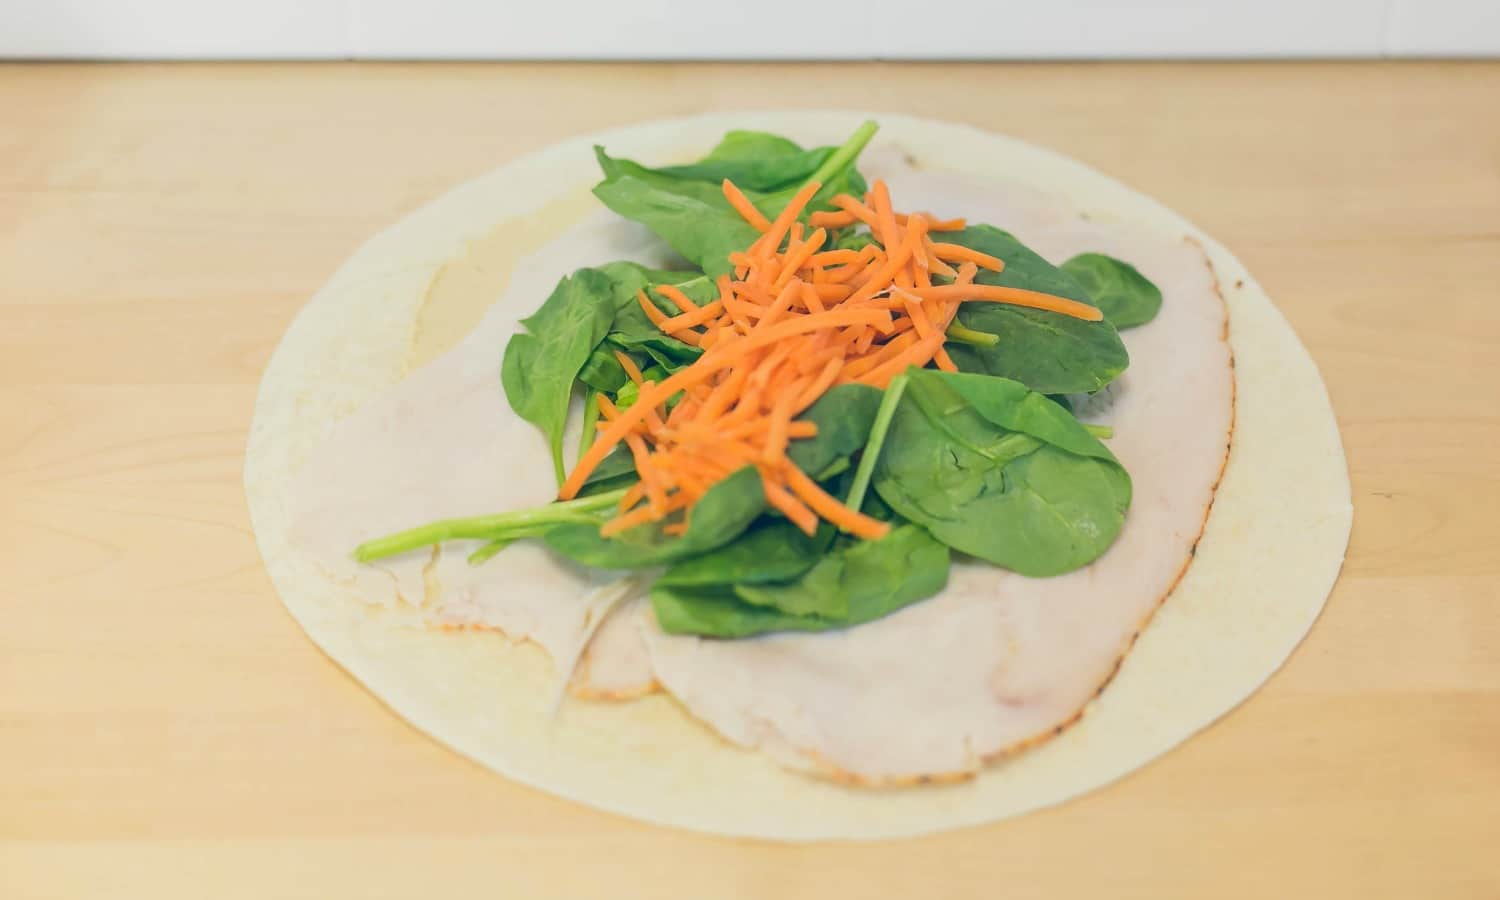 Add a layer of spinach and carrots to the middle of the wrap.